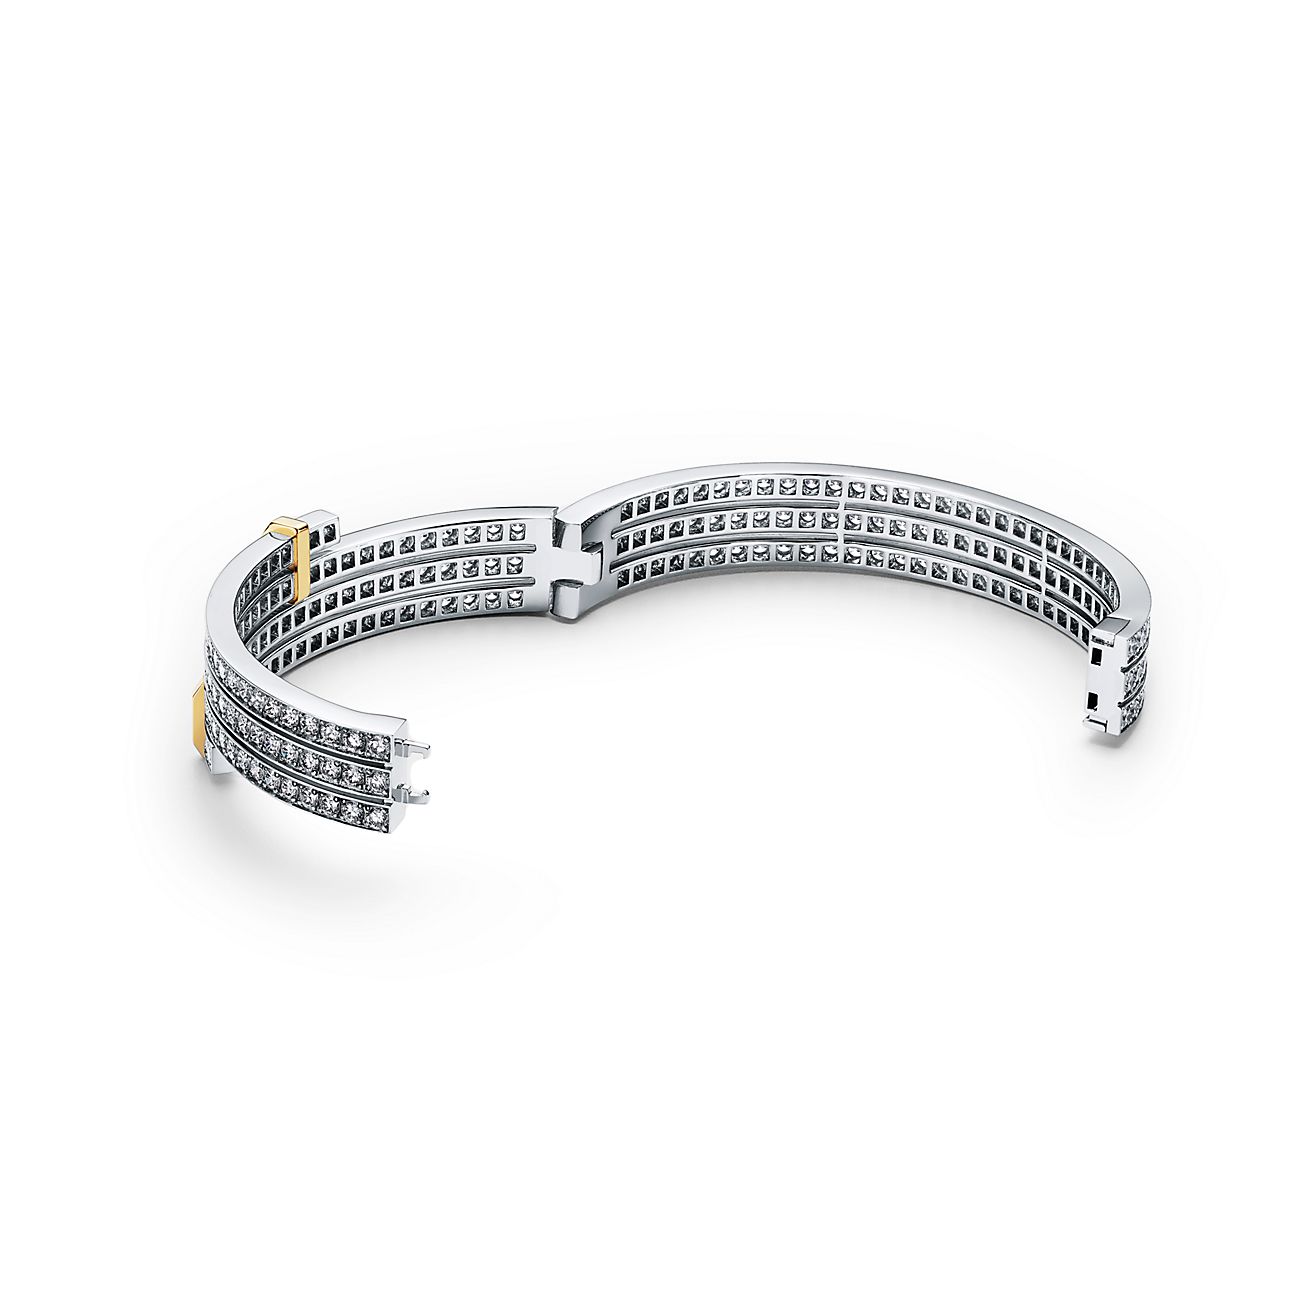 Tiffany Edge Multi-Row Bypass Bracelet in Platinum and Yellow Gold with Diamonds, Size: Medium